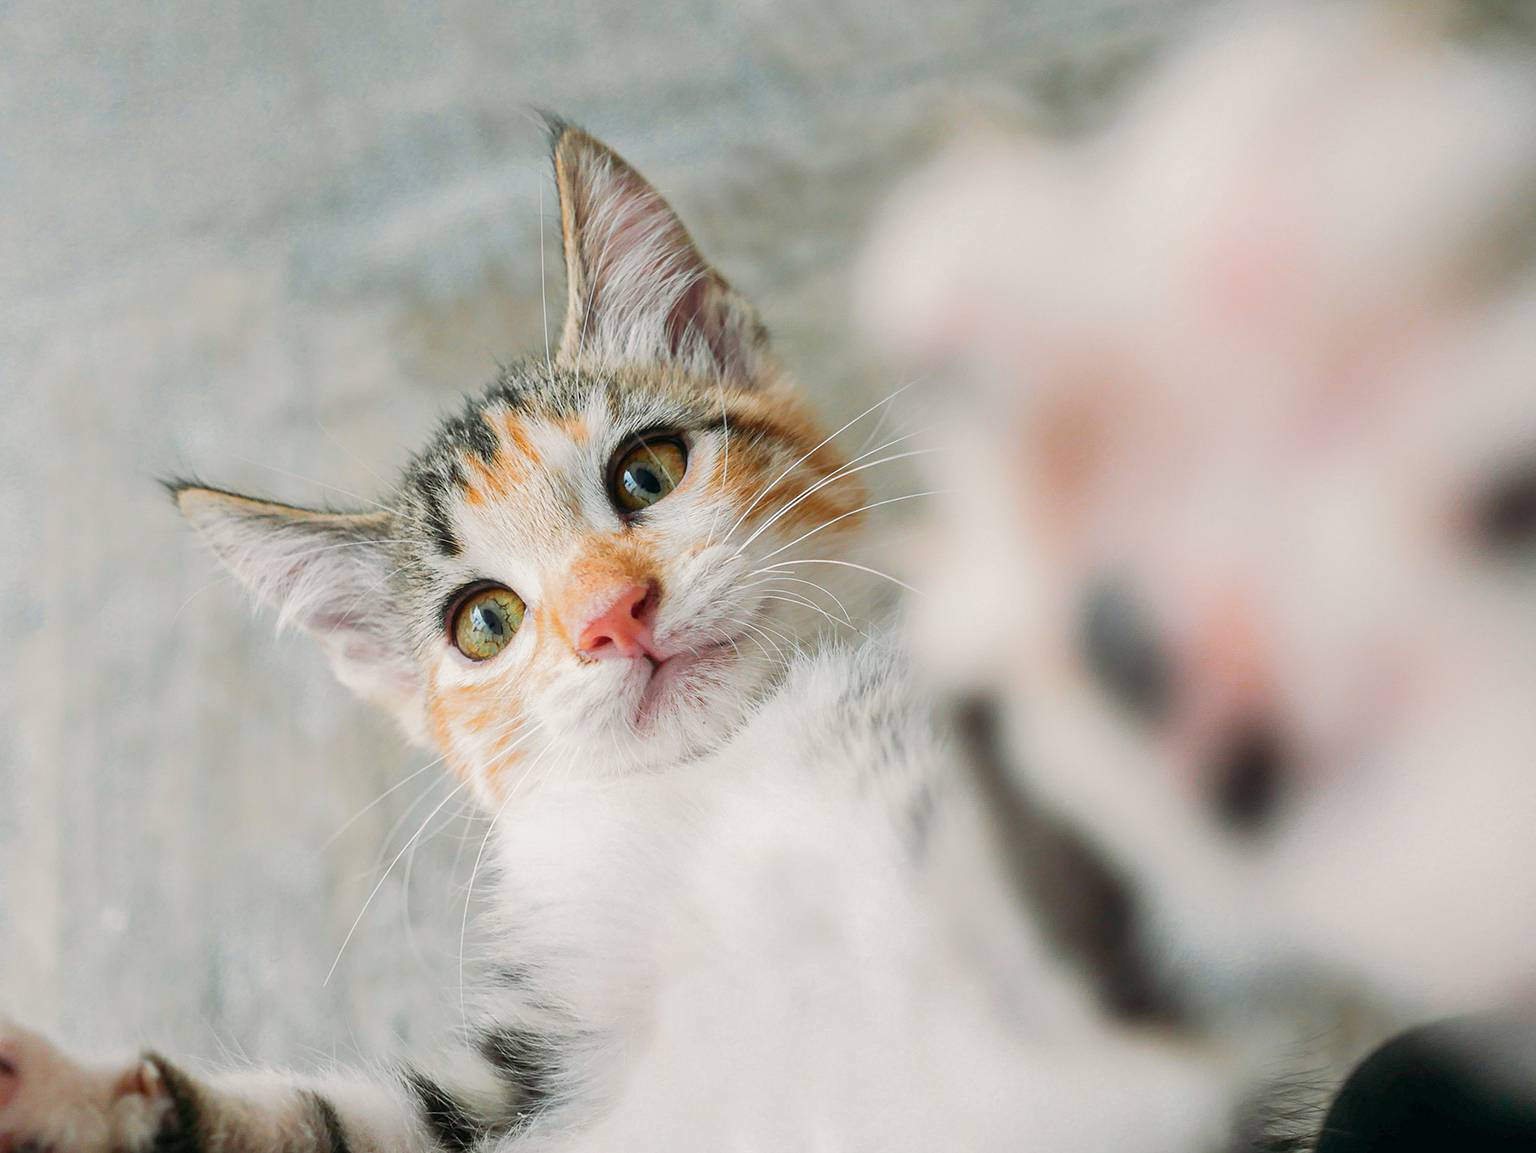 A close-up of a playful cat touching the camera